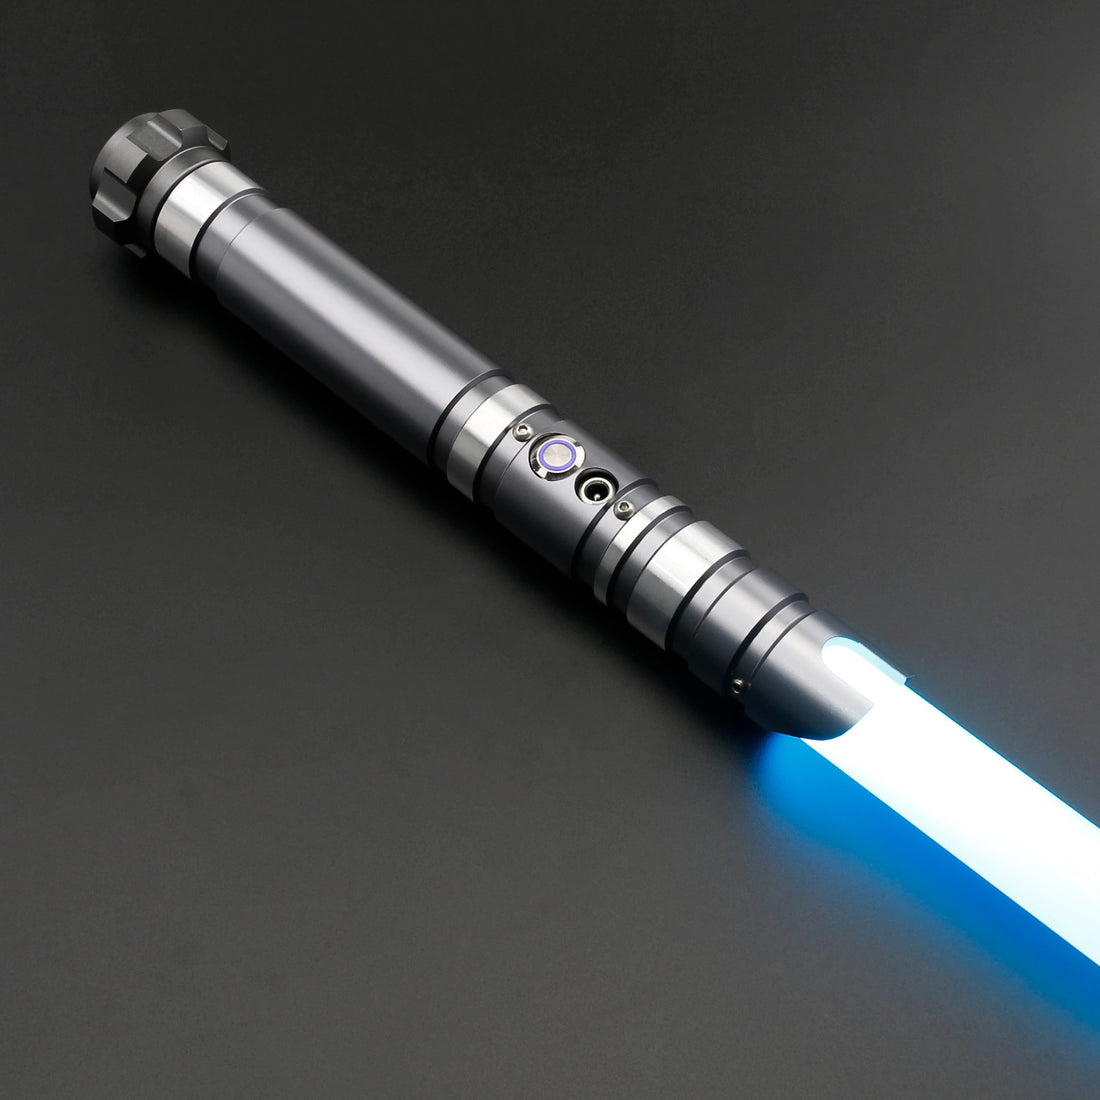 THE SITH FANG LIGHTSABER